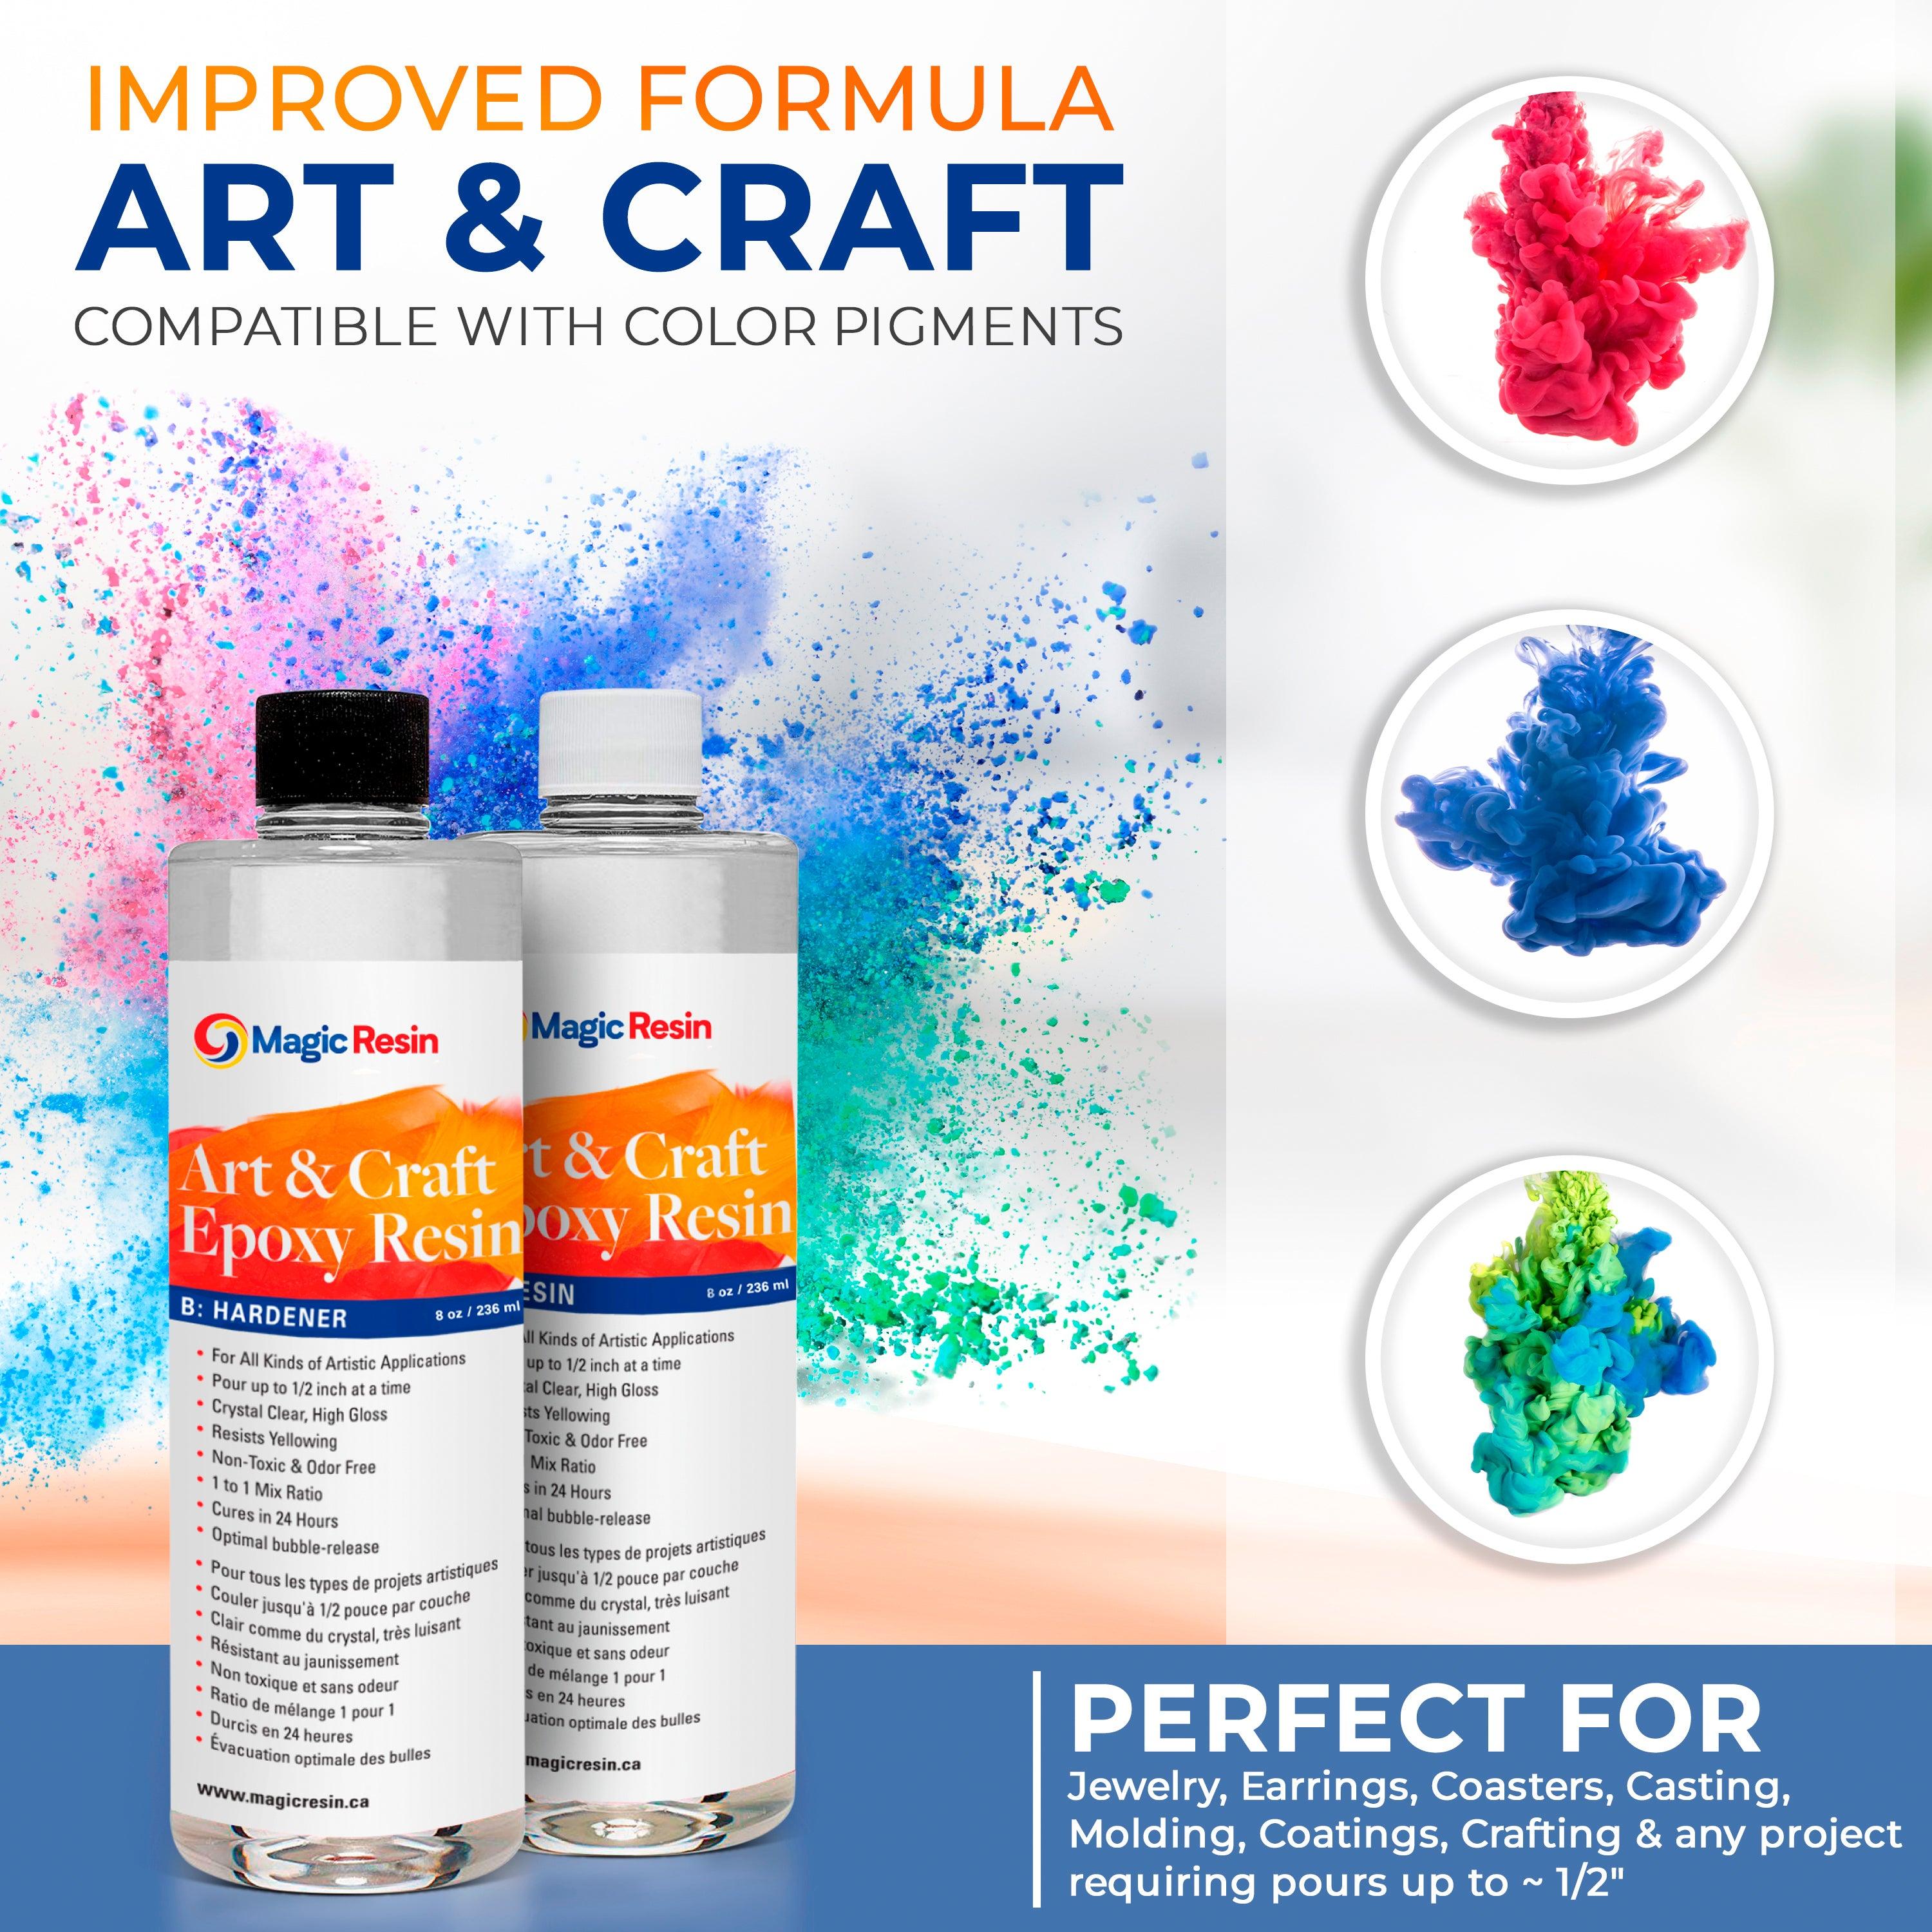 16 Oz (473 ml) | Art & Craft Epoxy Resin Kit | Includes 3 pairs of gloves, 2 cups, 4 sticks & 5 x 5g mica powder bags | Free express shipping - Magic Resin USA